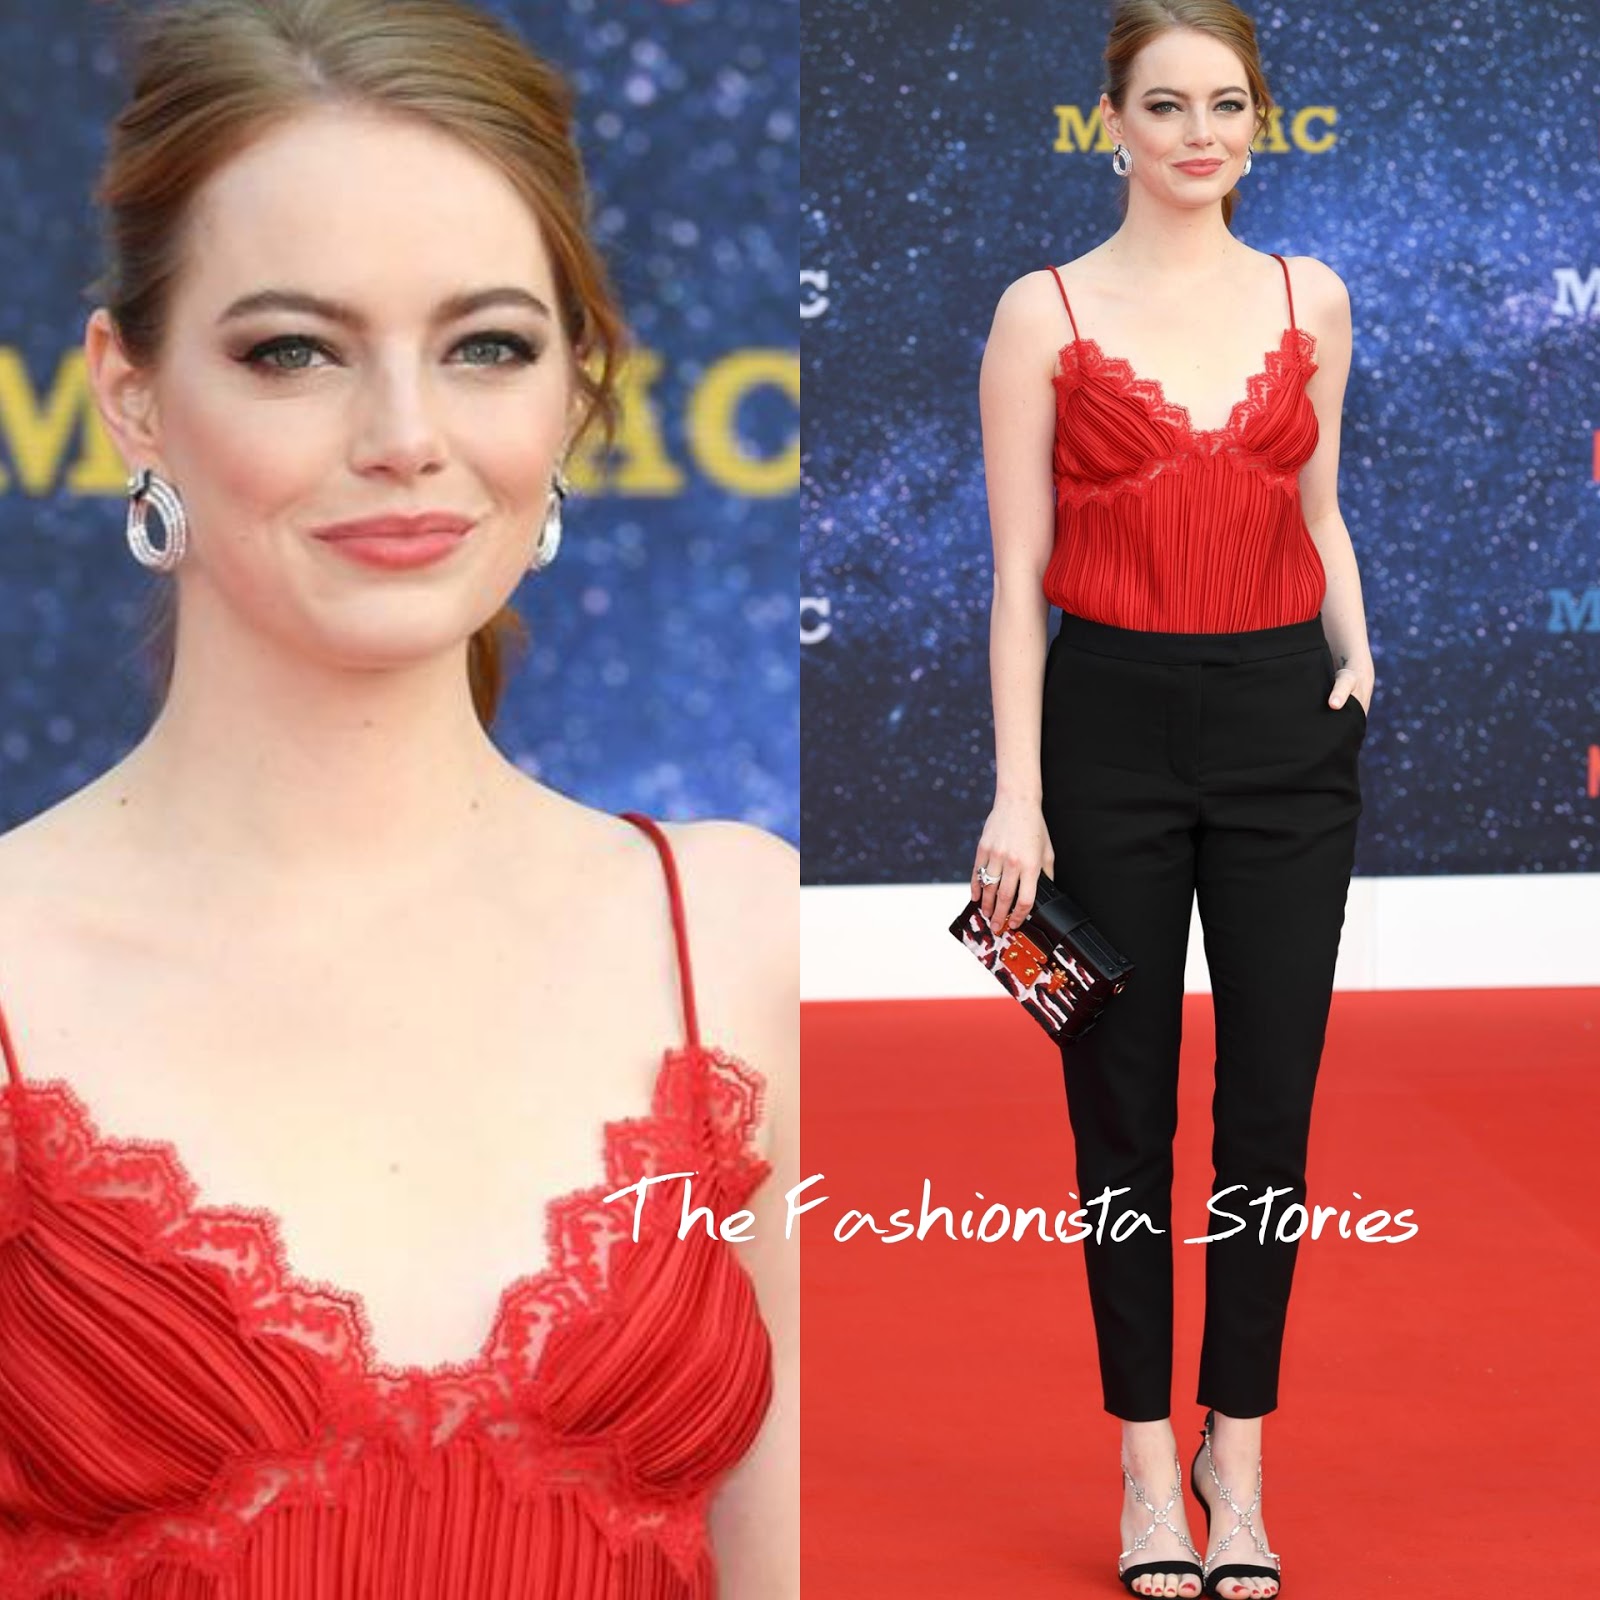 Emma Stone in Louis Vuitton at the 'Maniac' London Premiere